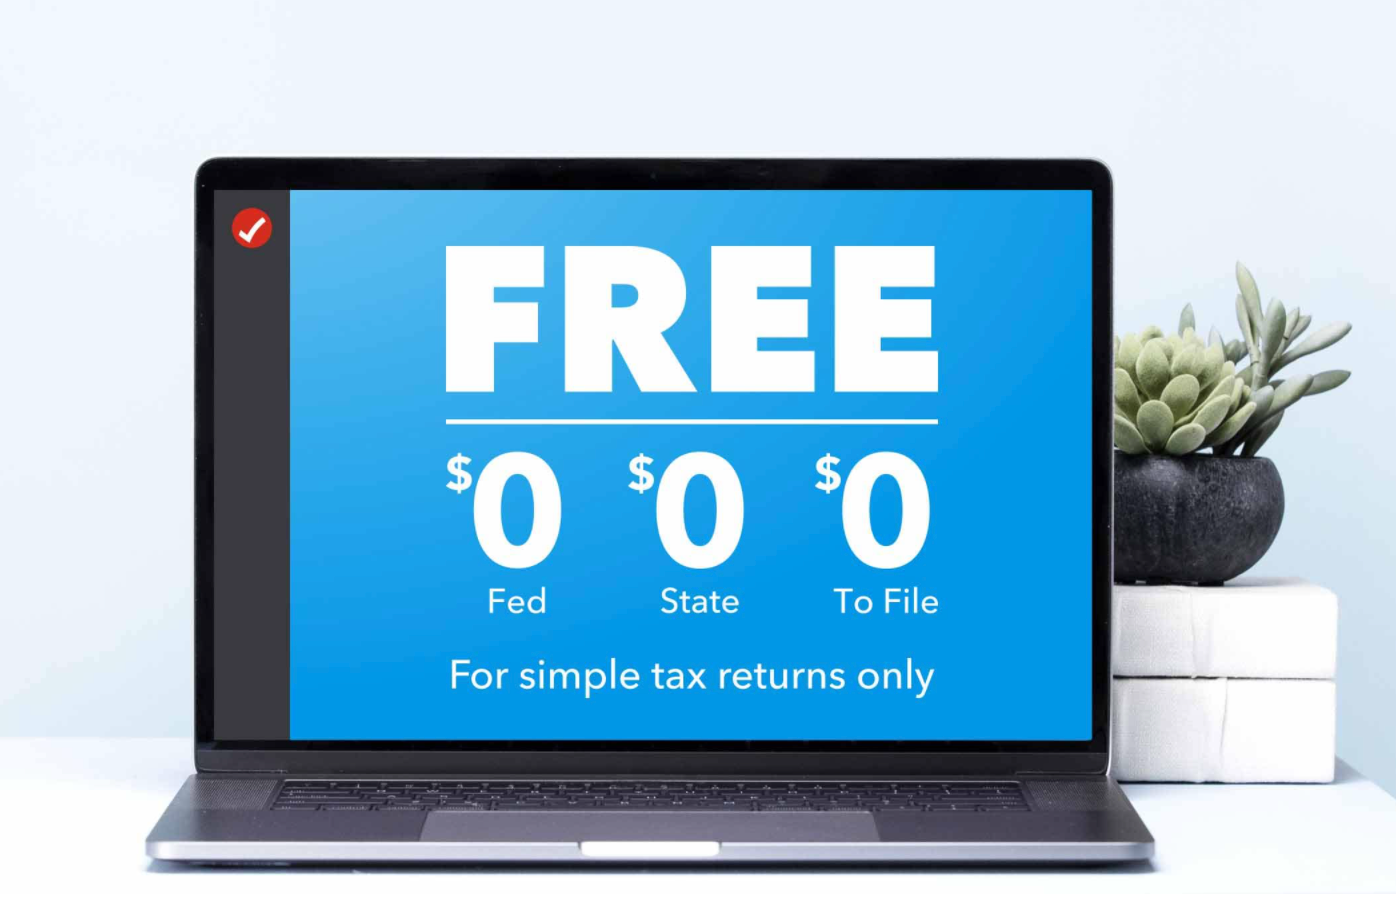 turbotax for macbook